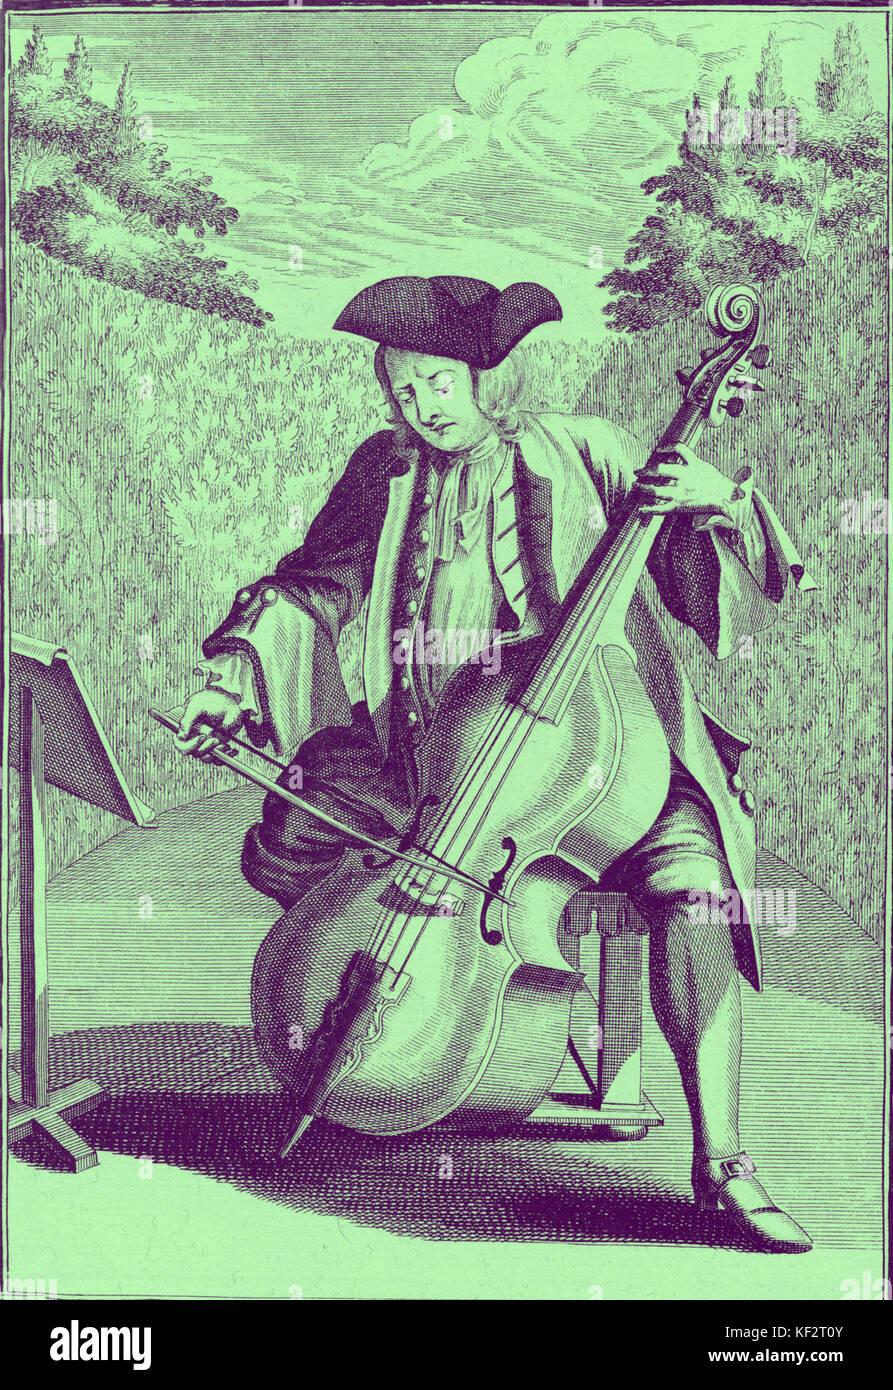 Man playing cello. Engraving by J. C. Weigel (1661-1726) from 'Musicalisches Theatrum'. Late 17th century/ early 17th century. Stock Photo